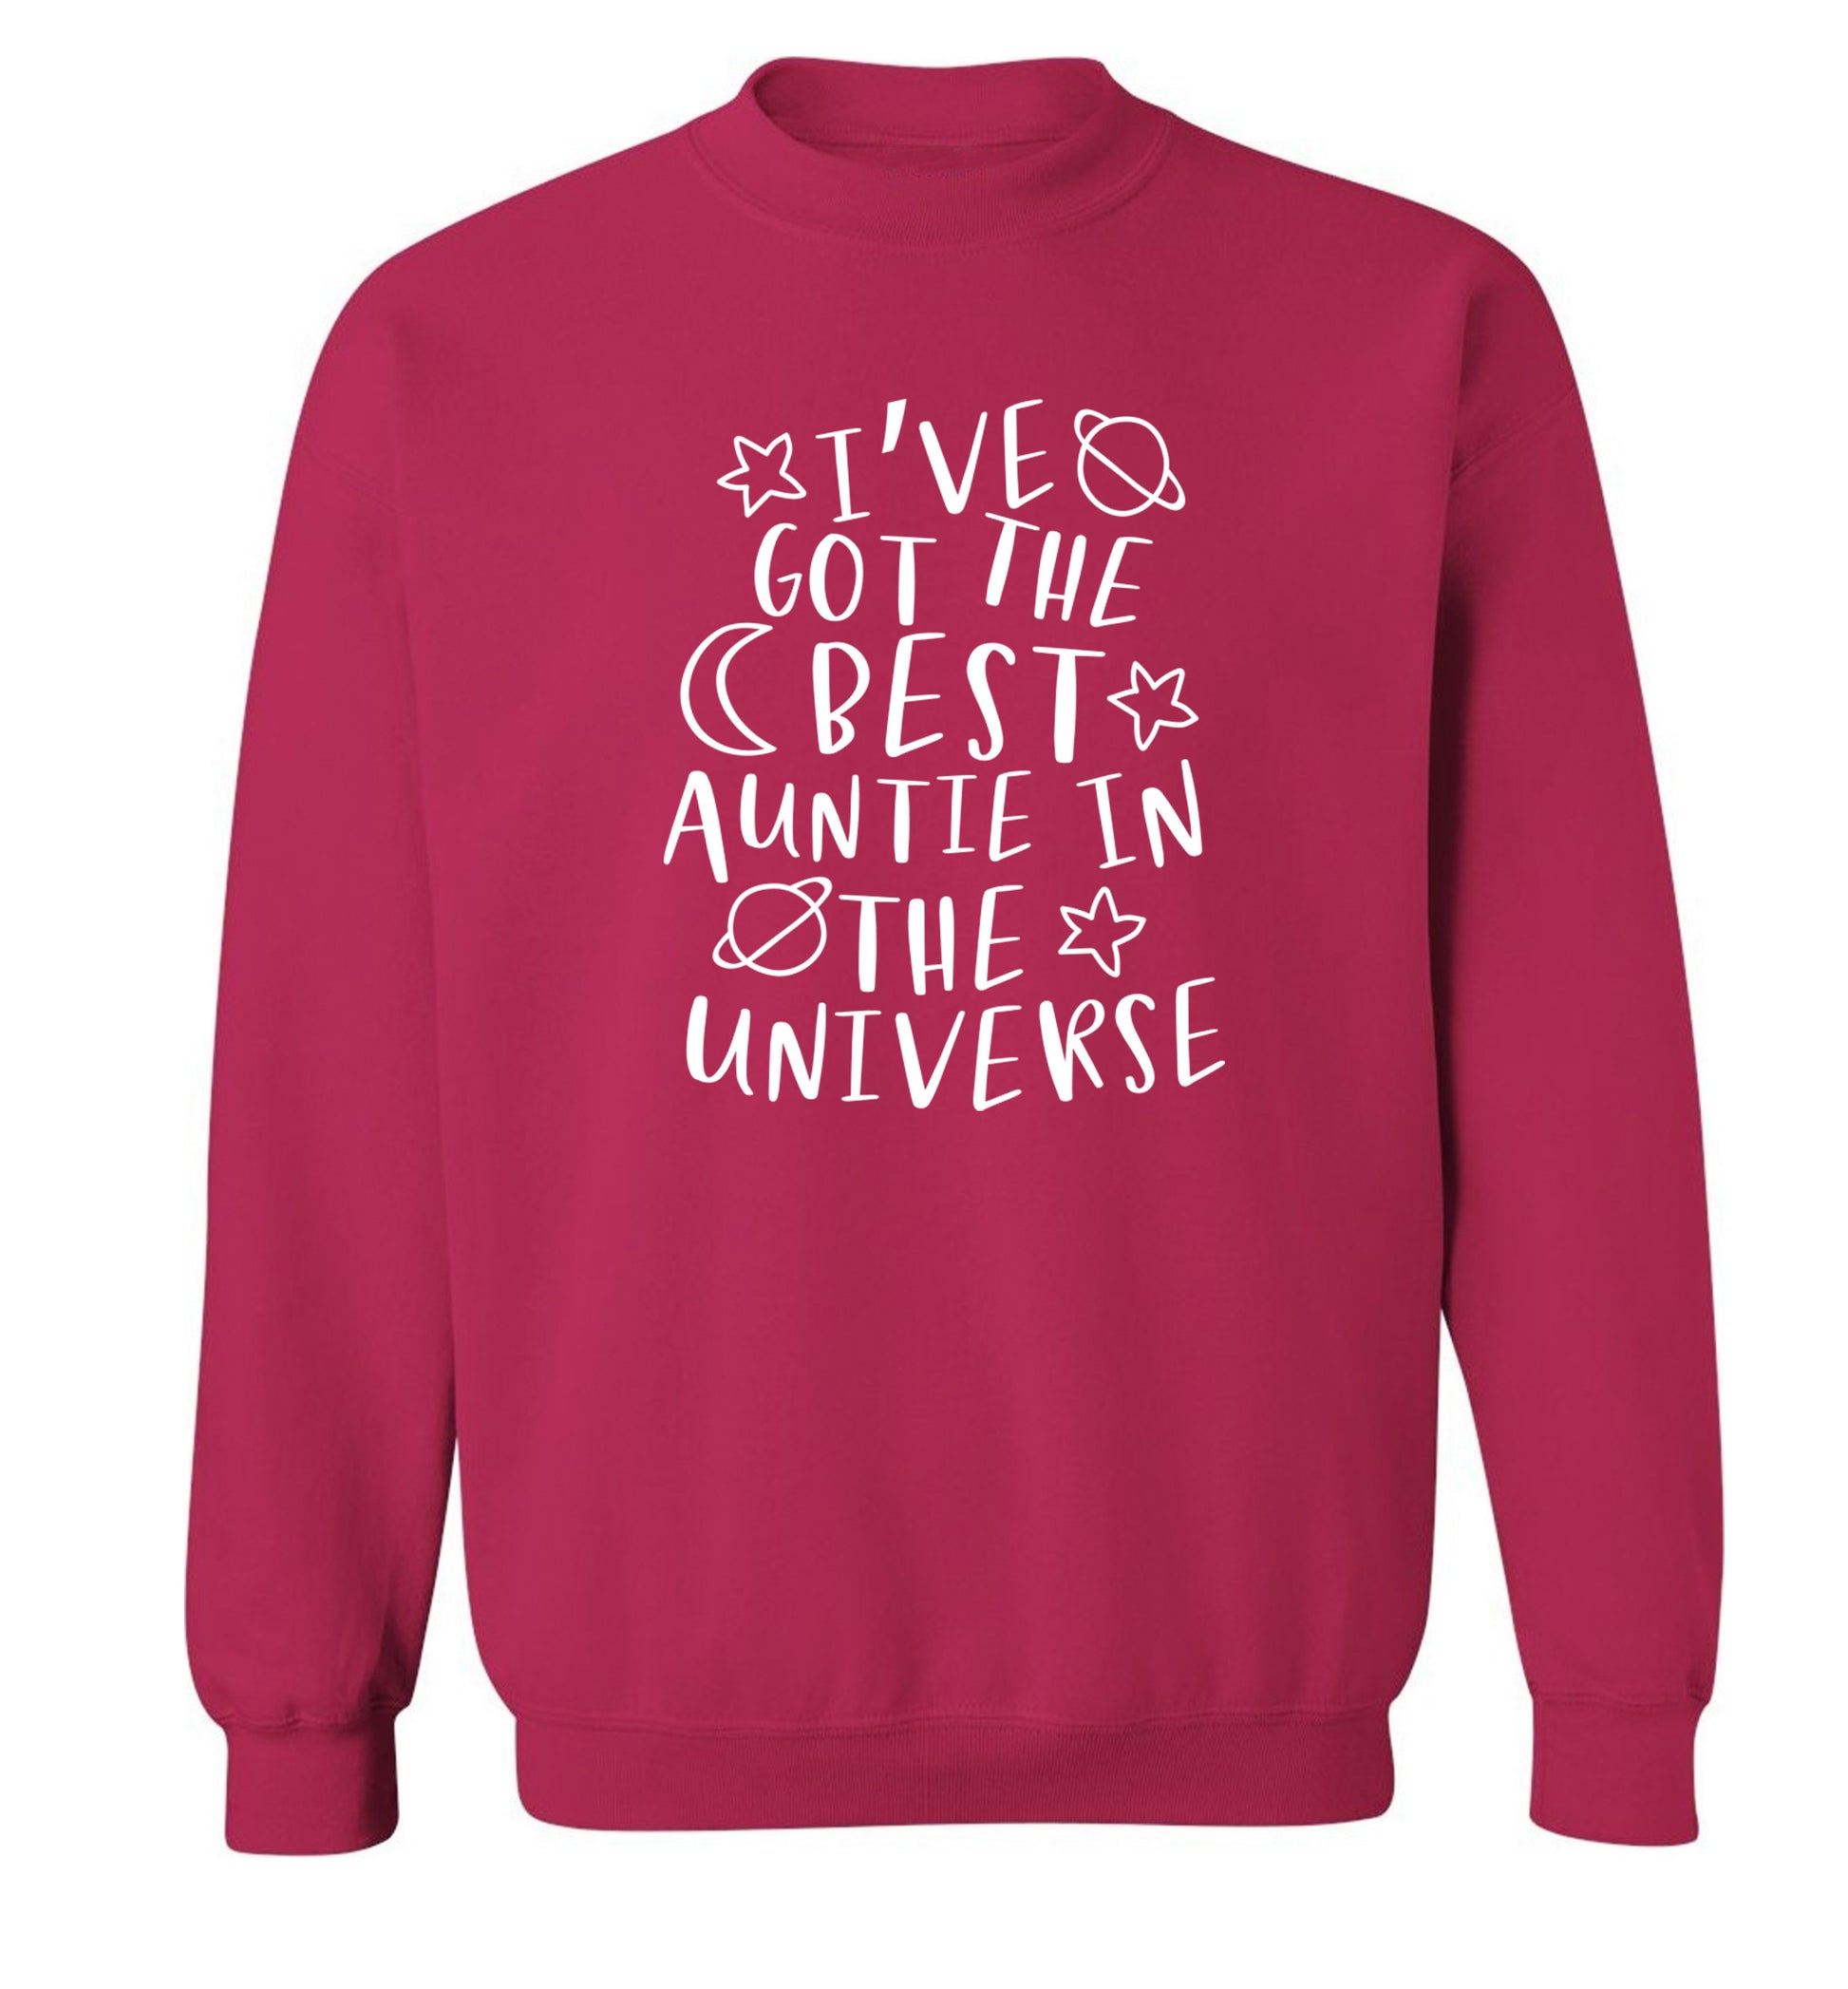 I've got the best auntie in the universe Adult's unisex pink Sweater 2XL